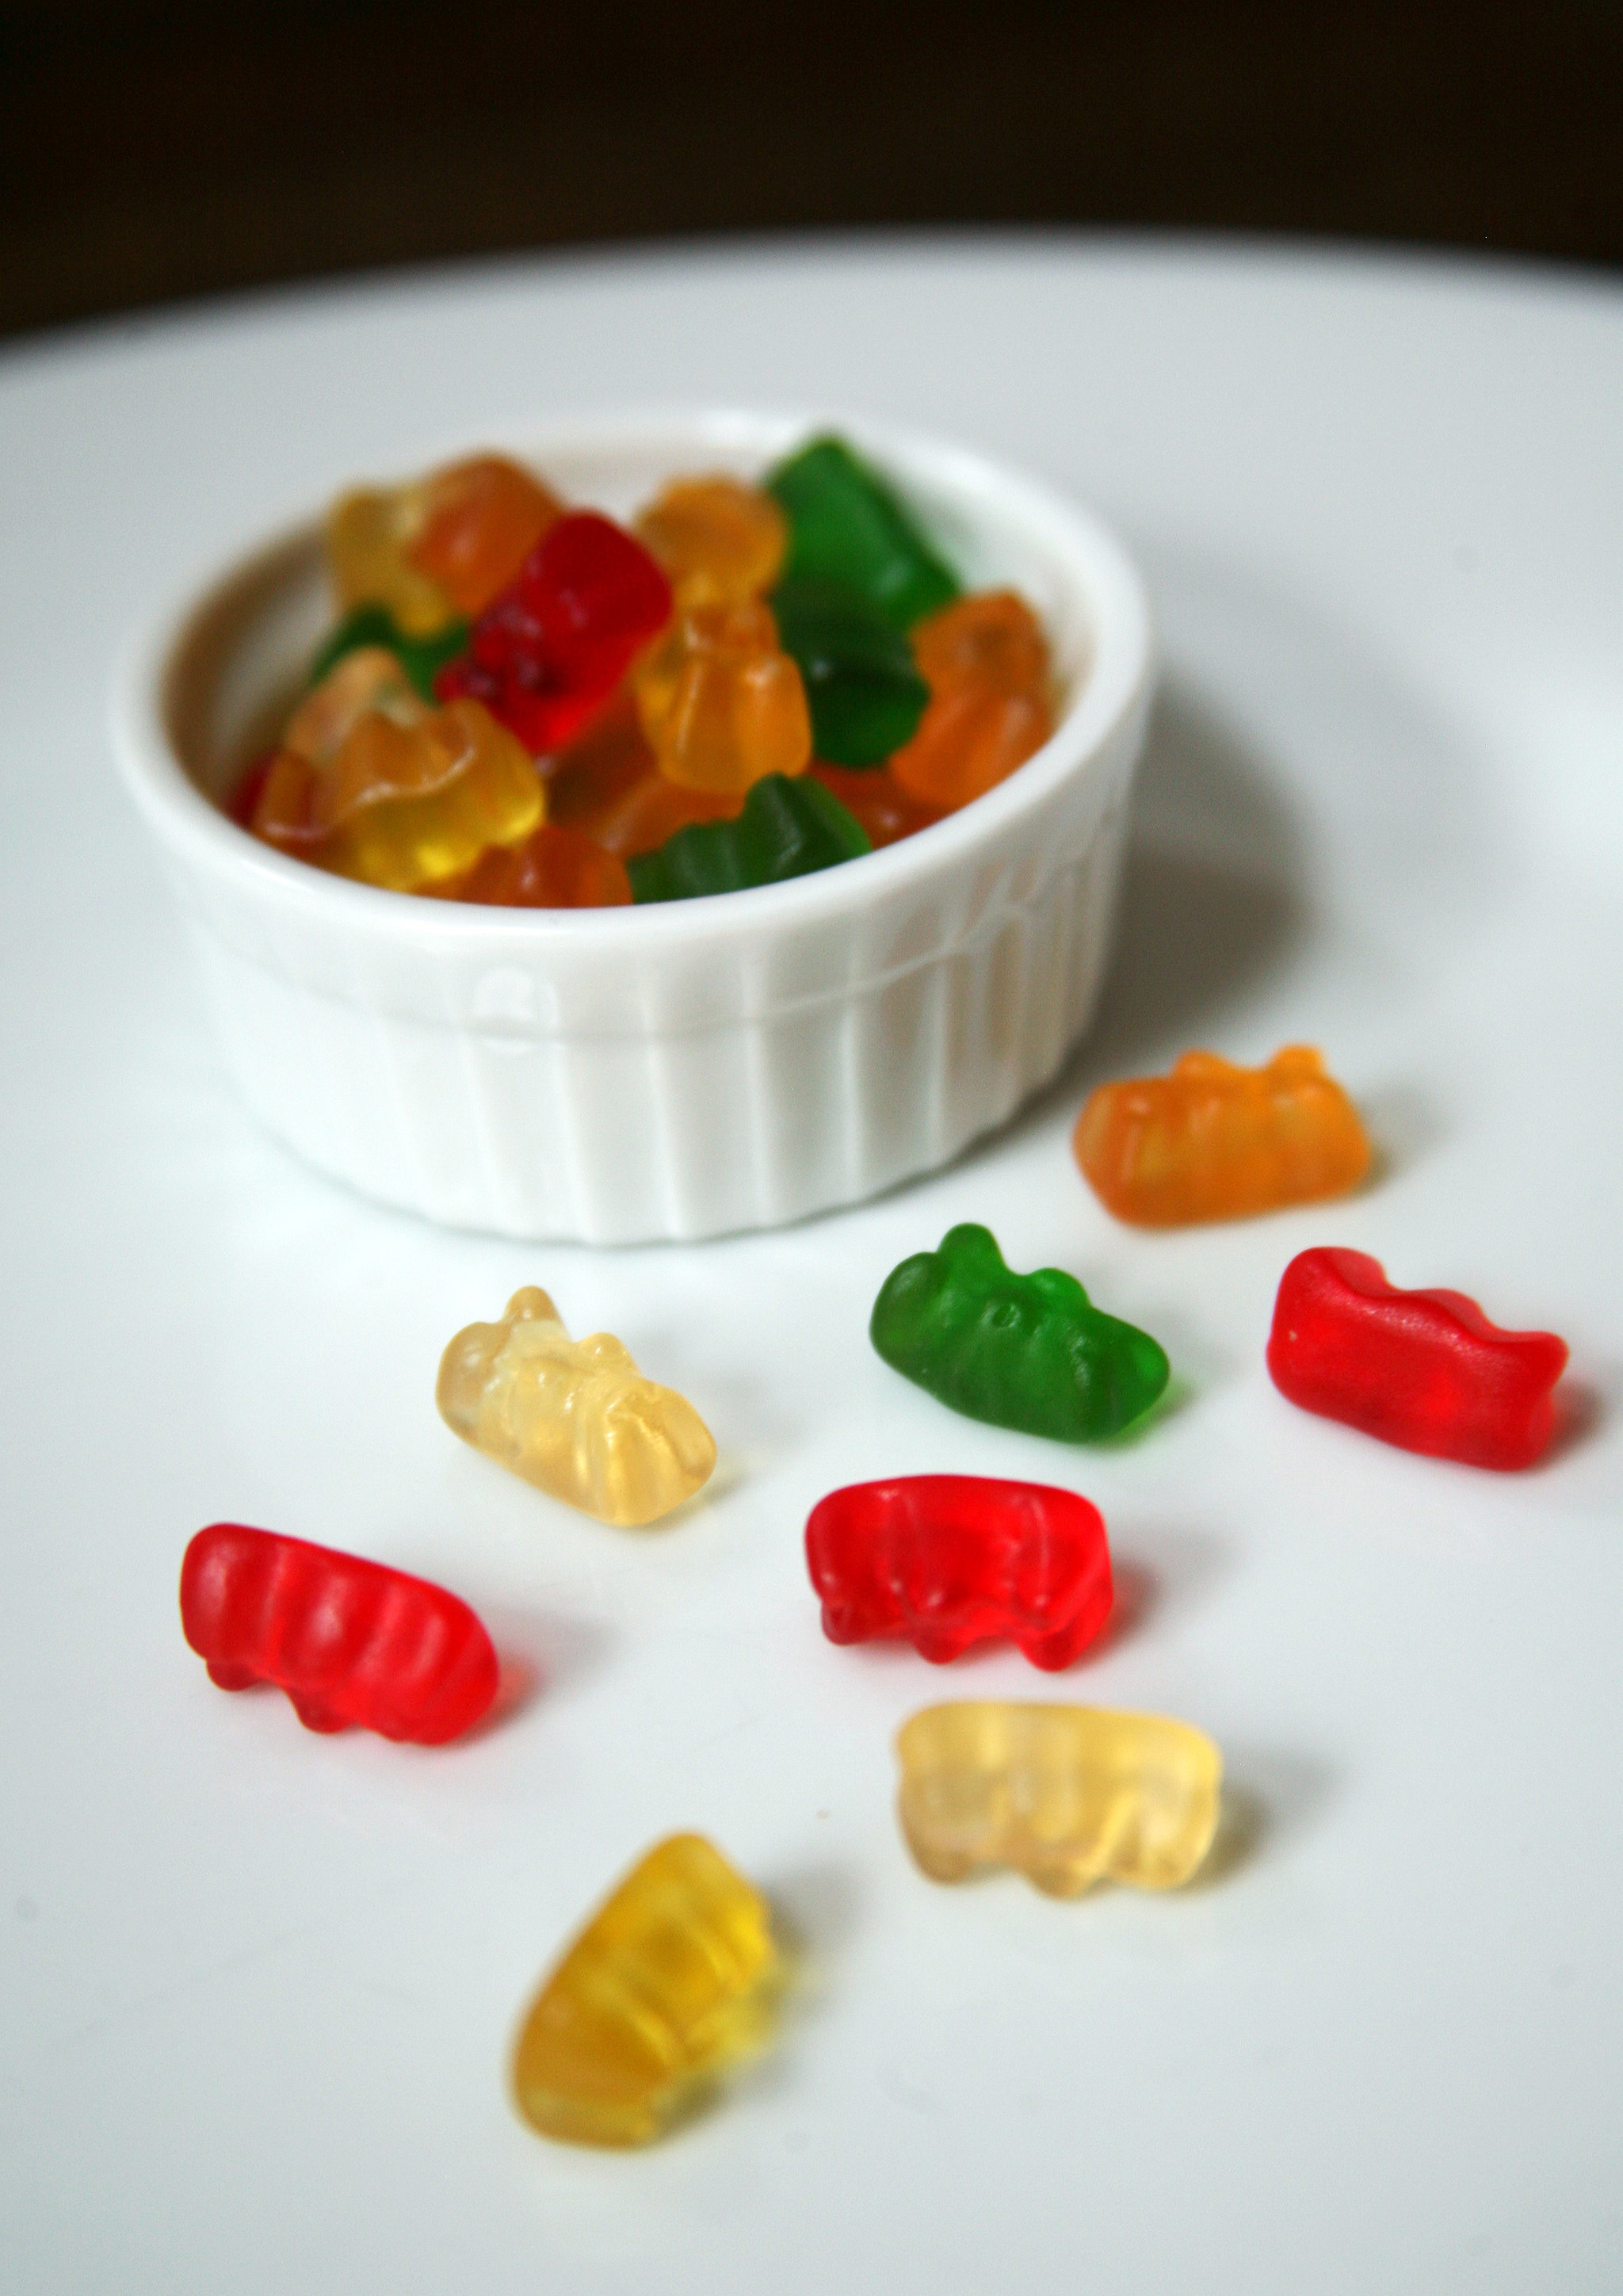 You'll Never Eat Another Gummy Bear Again After Hearing What It's Made From